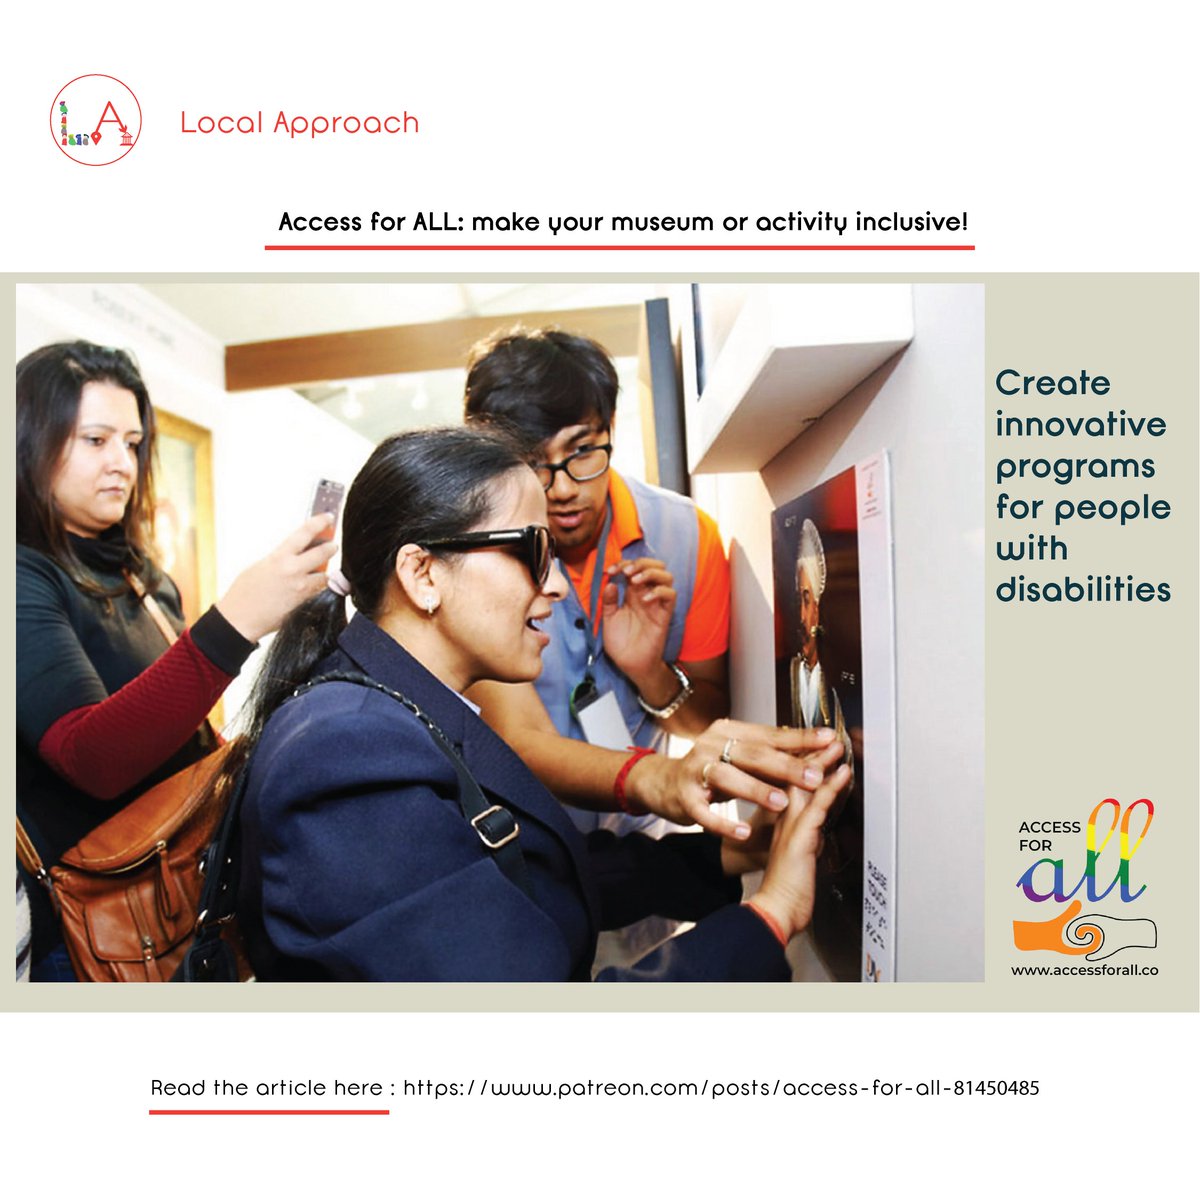 #AccessforALL : make your #museum or activity #inclusive!

patreon.com/posts/access-f…

#innovativeprograms #equalaccess #culturalexperiences #HeritageAccess #heritageactivities #culturalmanagement

‌